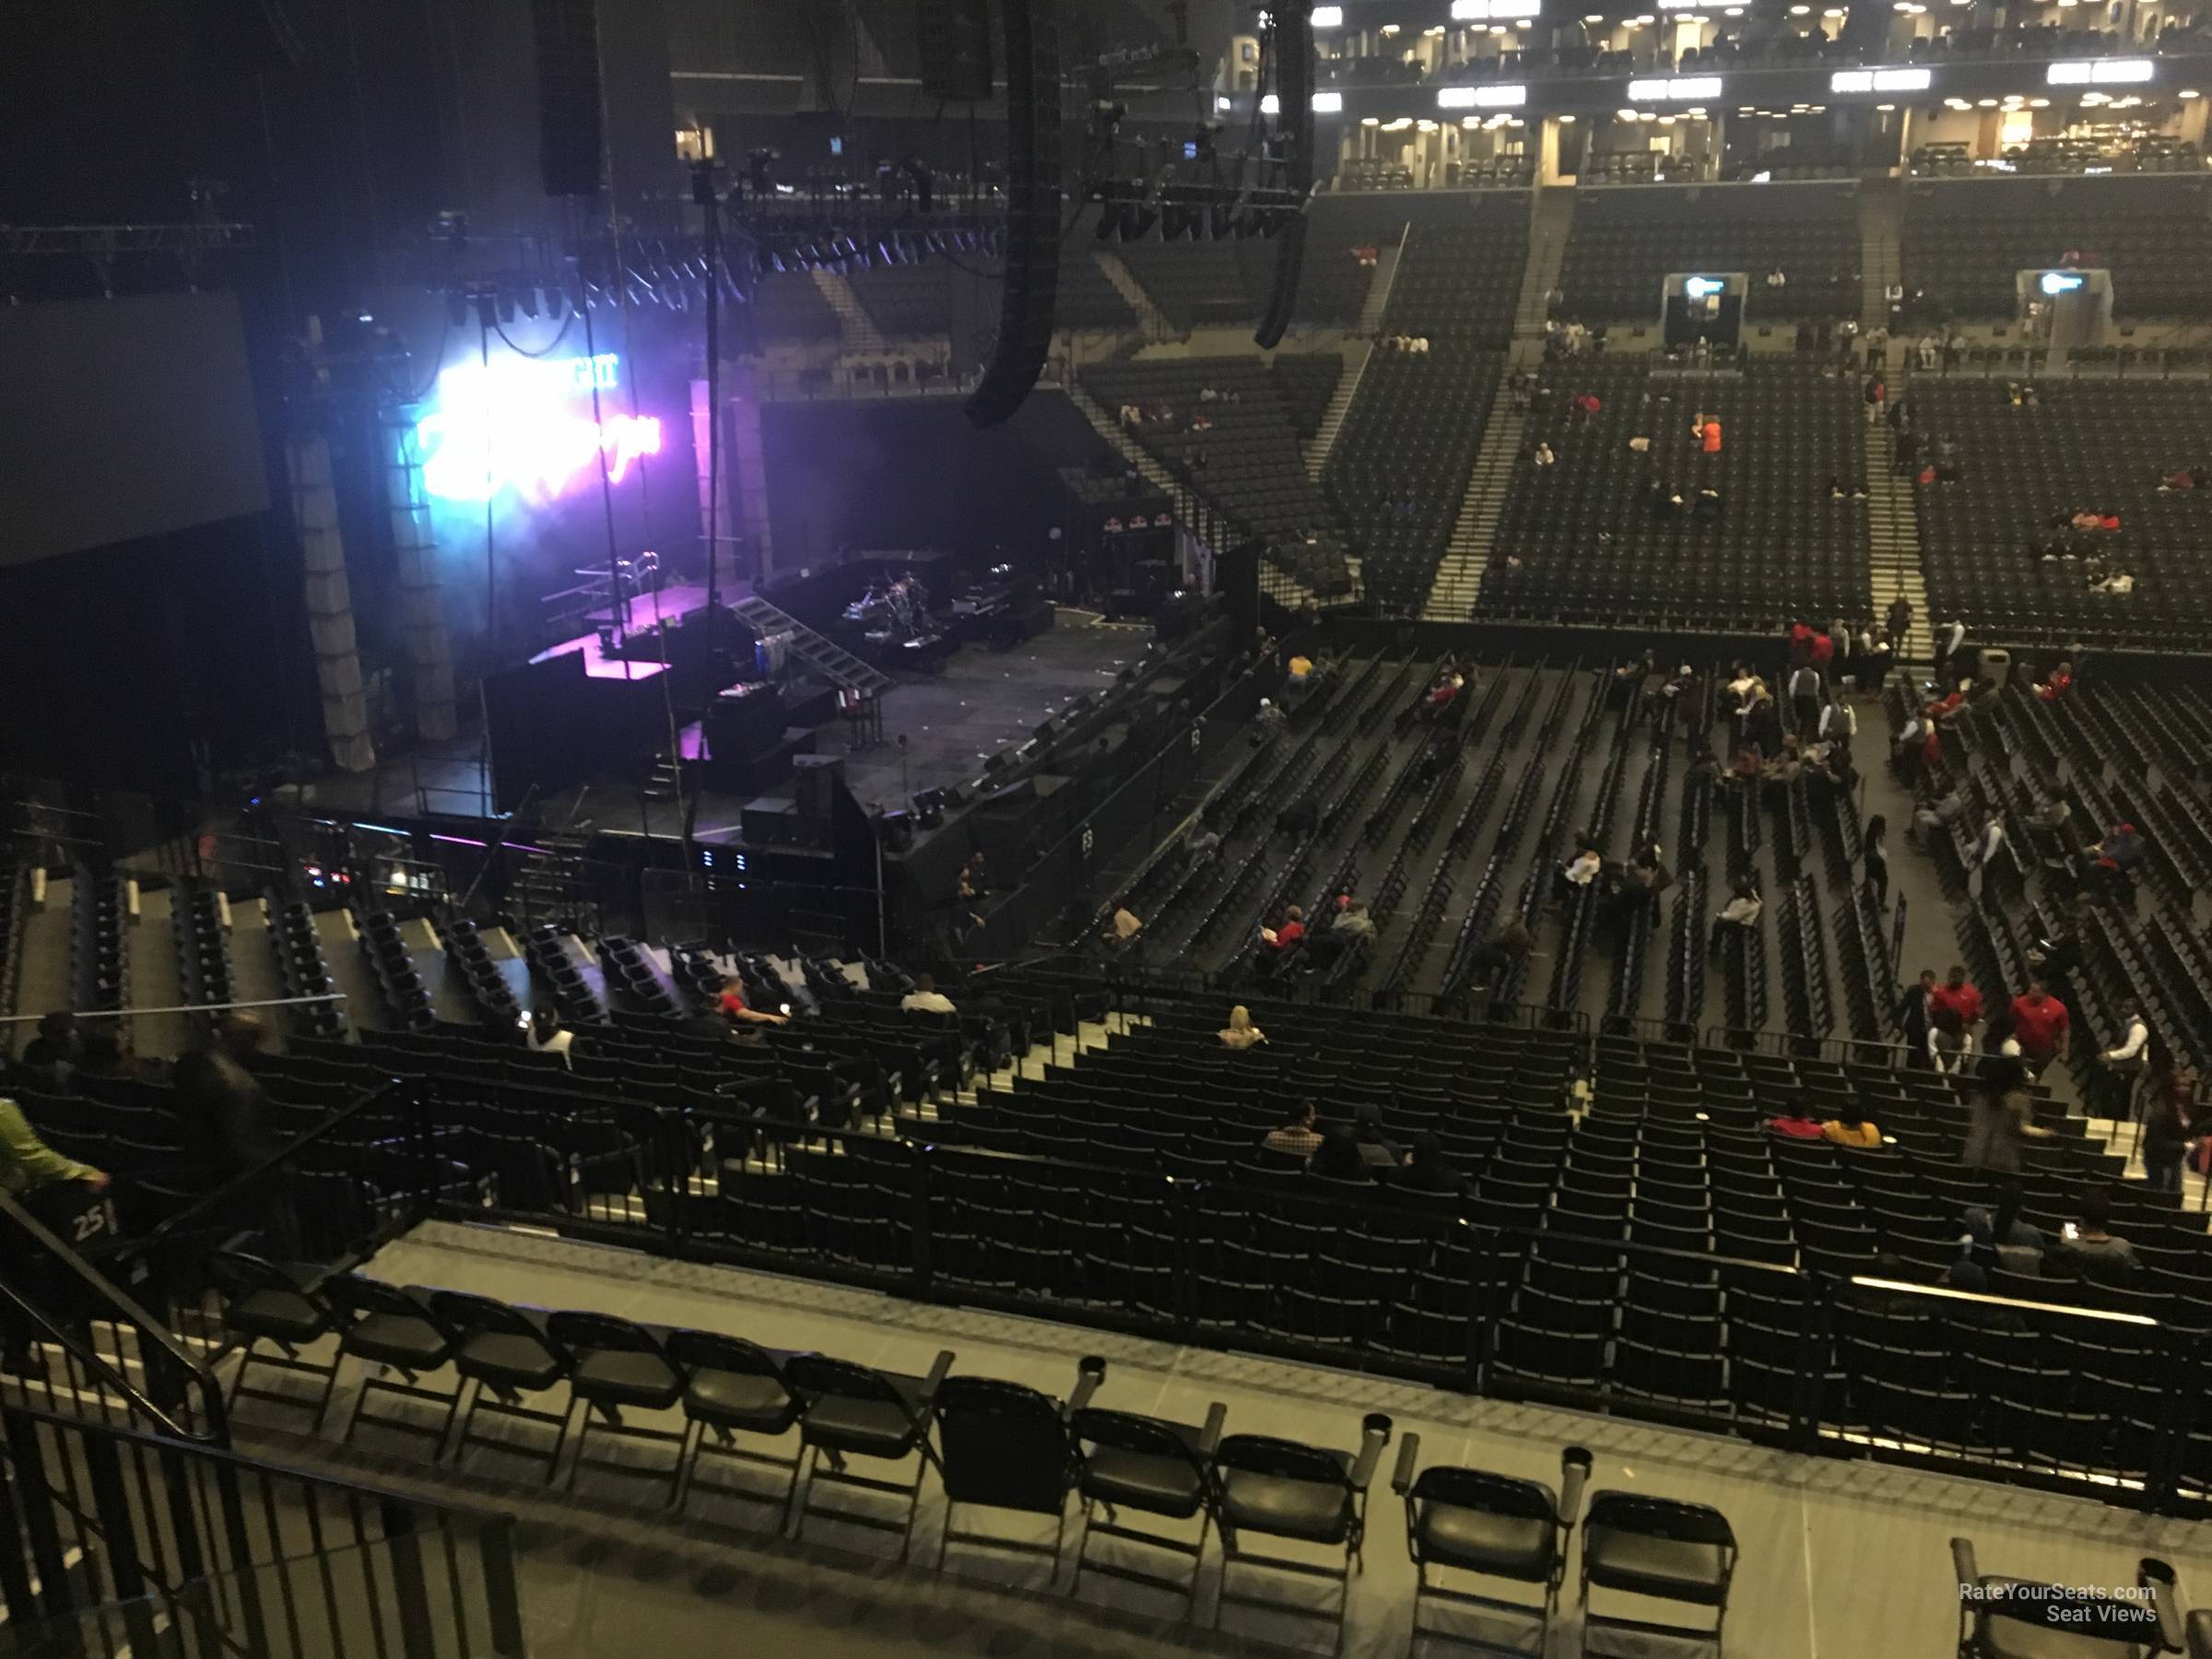 Barclays Center Seating Chart With Rows